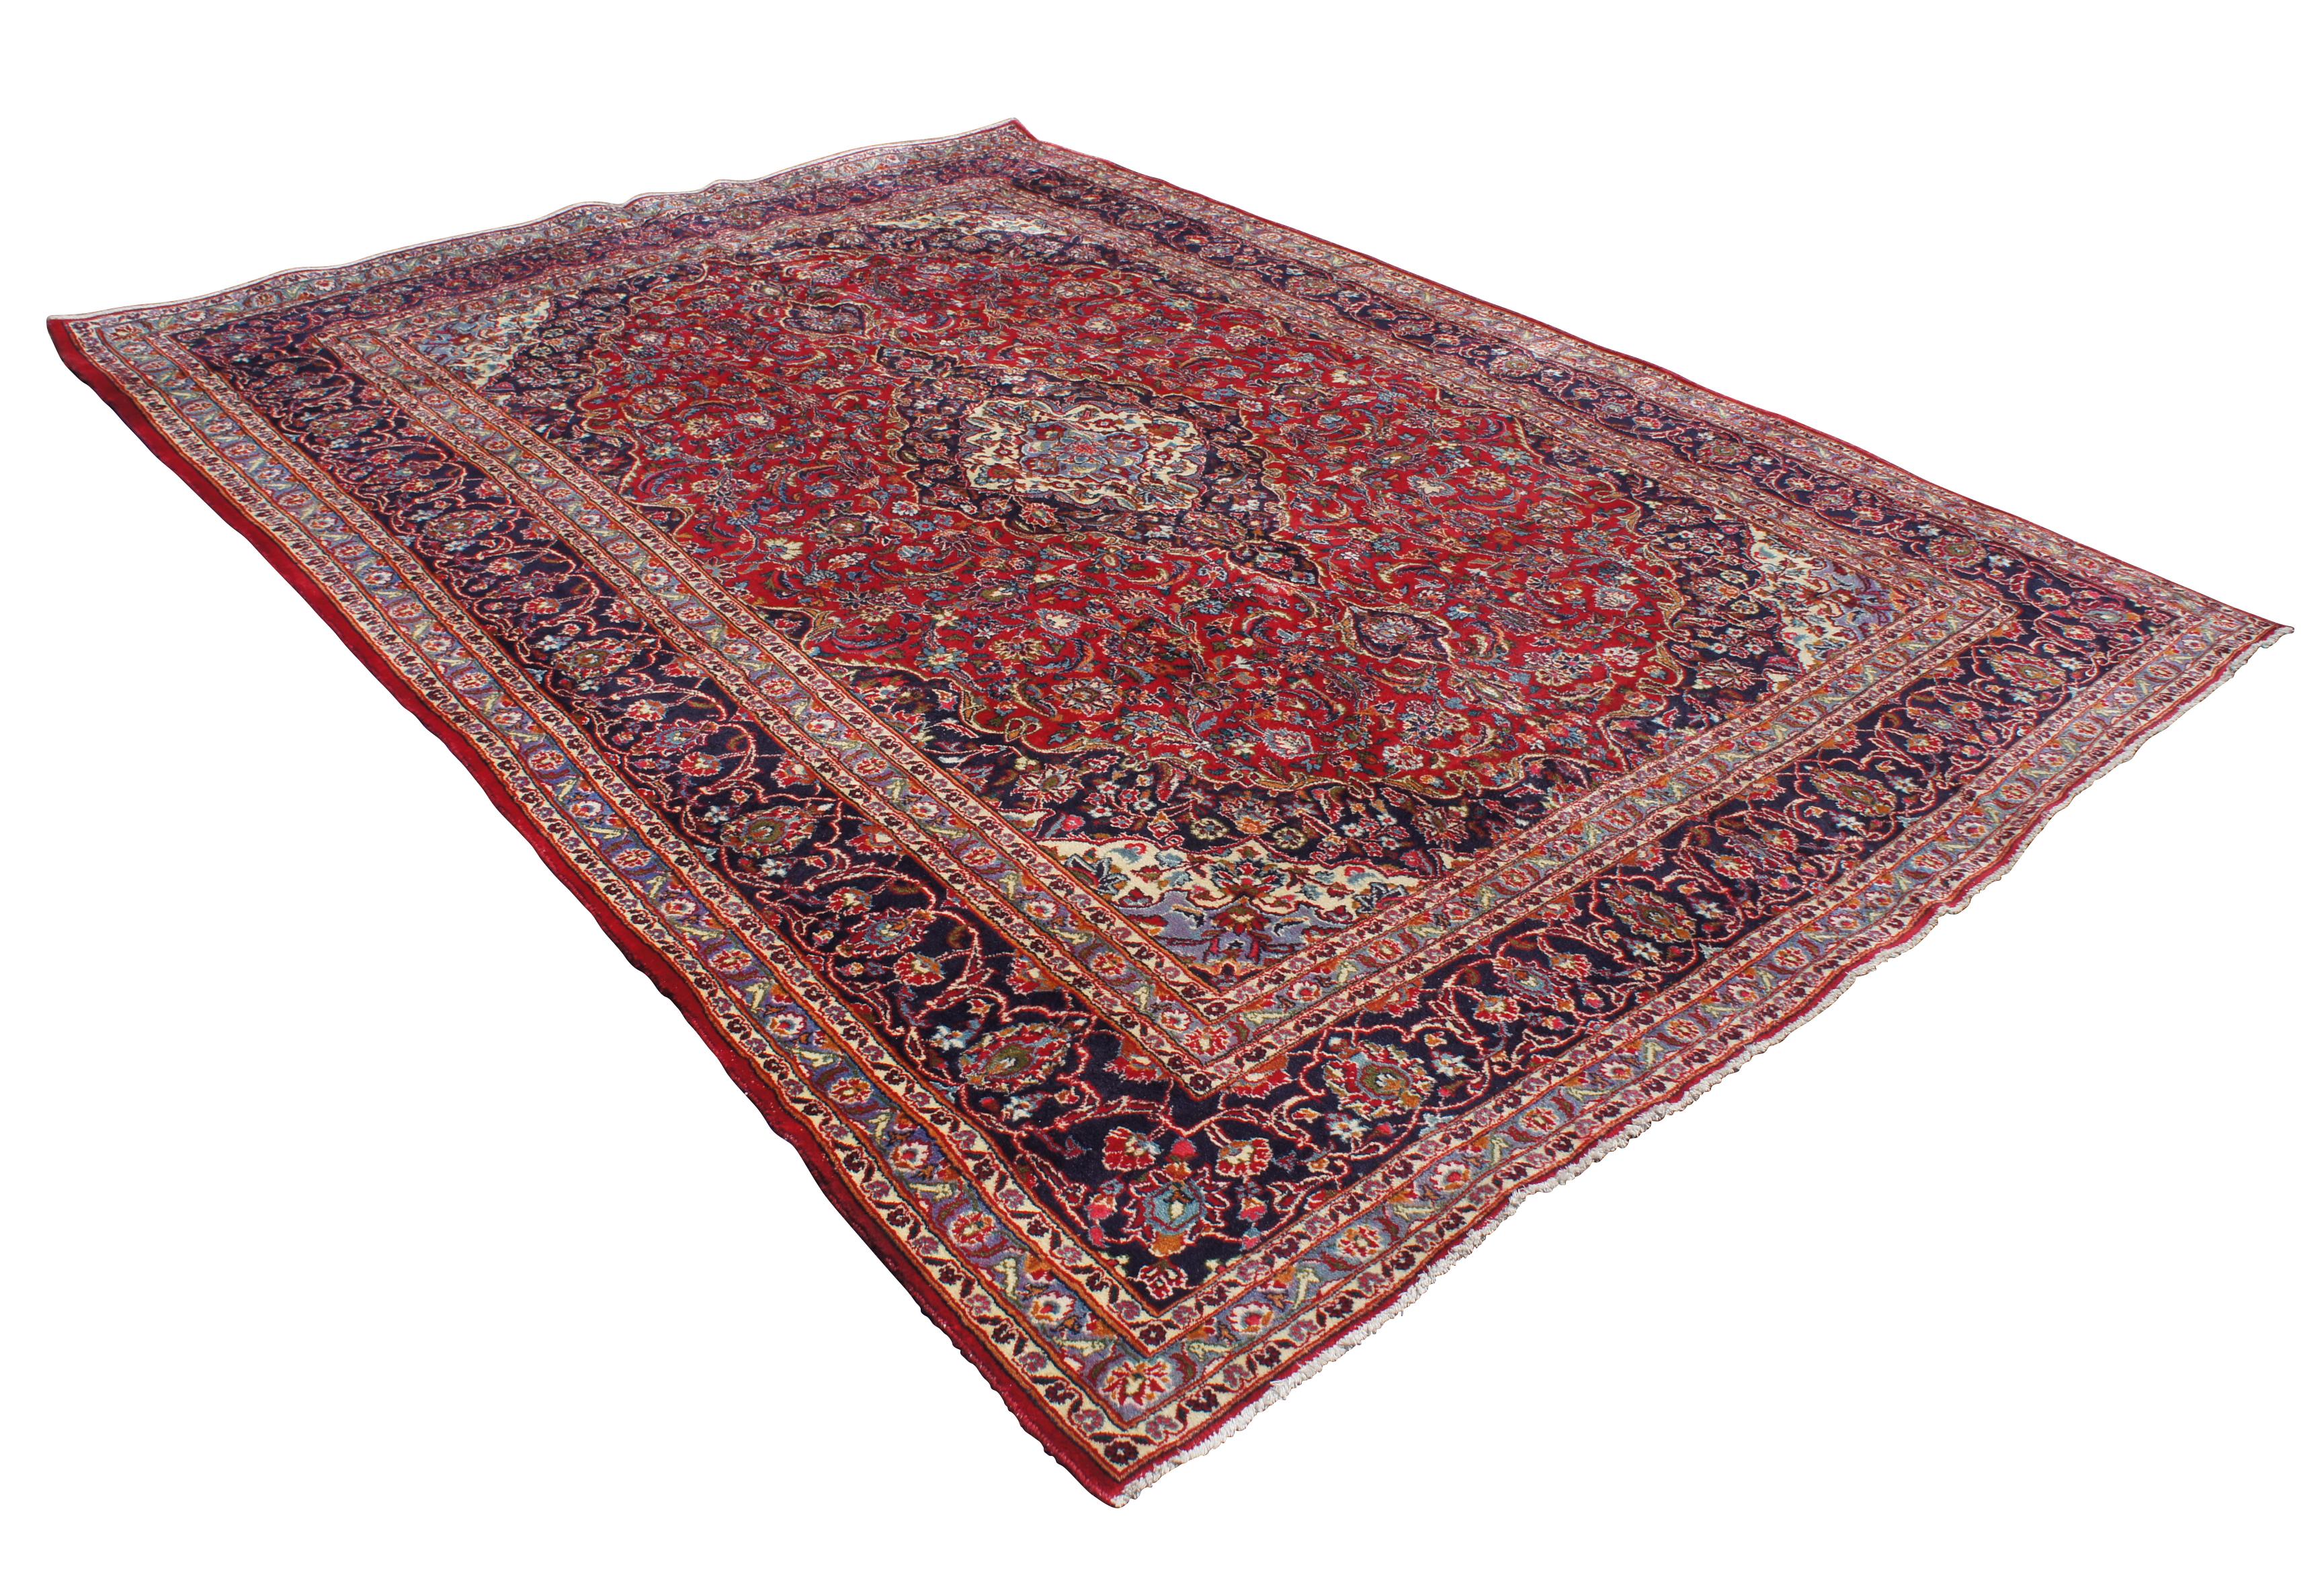 Islamic Mid-20th Century Hand Knotted Persian Keshan Wool Area Rug Blue Red For Sale